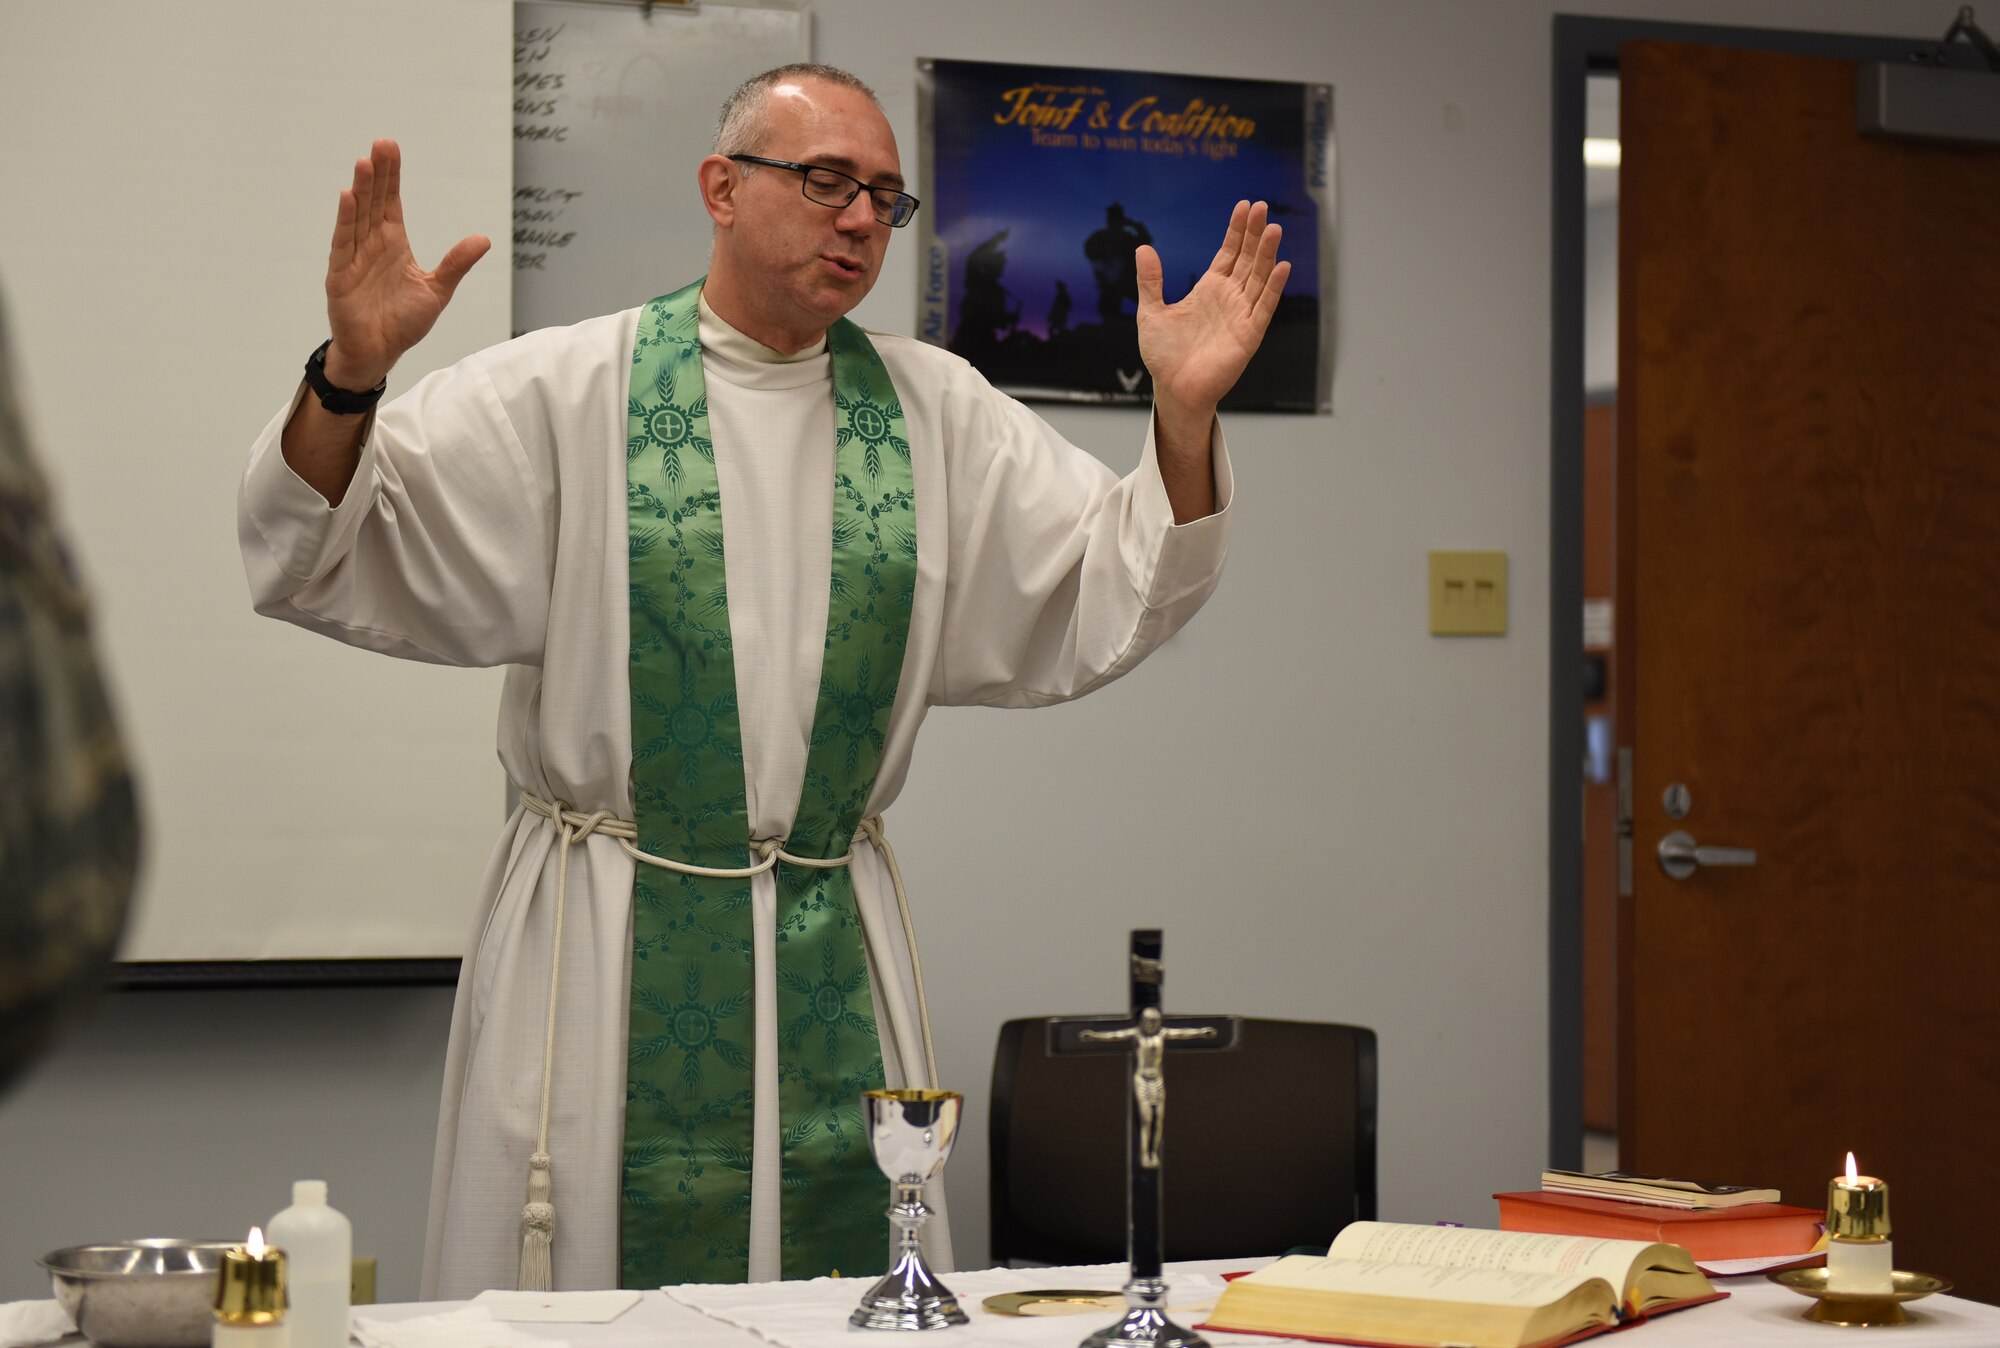 Father John B. Bateman, 193rd Special Operations Wing, Middletown, Pennsylvania, conducts a Catholic mass given to the attending members during October unit training assembly on base. The 193rd offers a variety of religious services for Airmen to attend. (U.S. Air National Guard photo by Senior Airman Ethan Carl/Released)